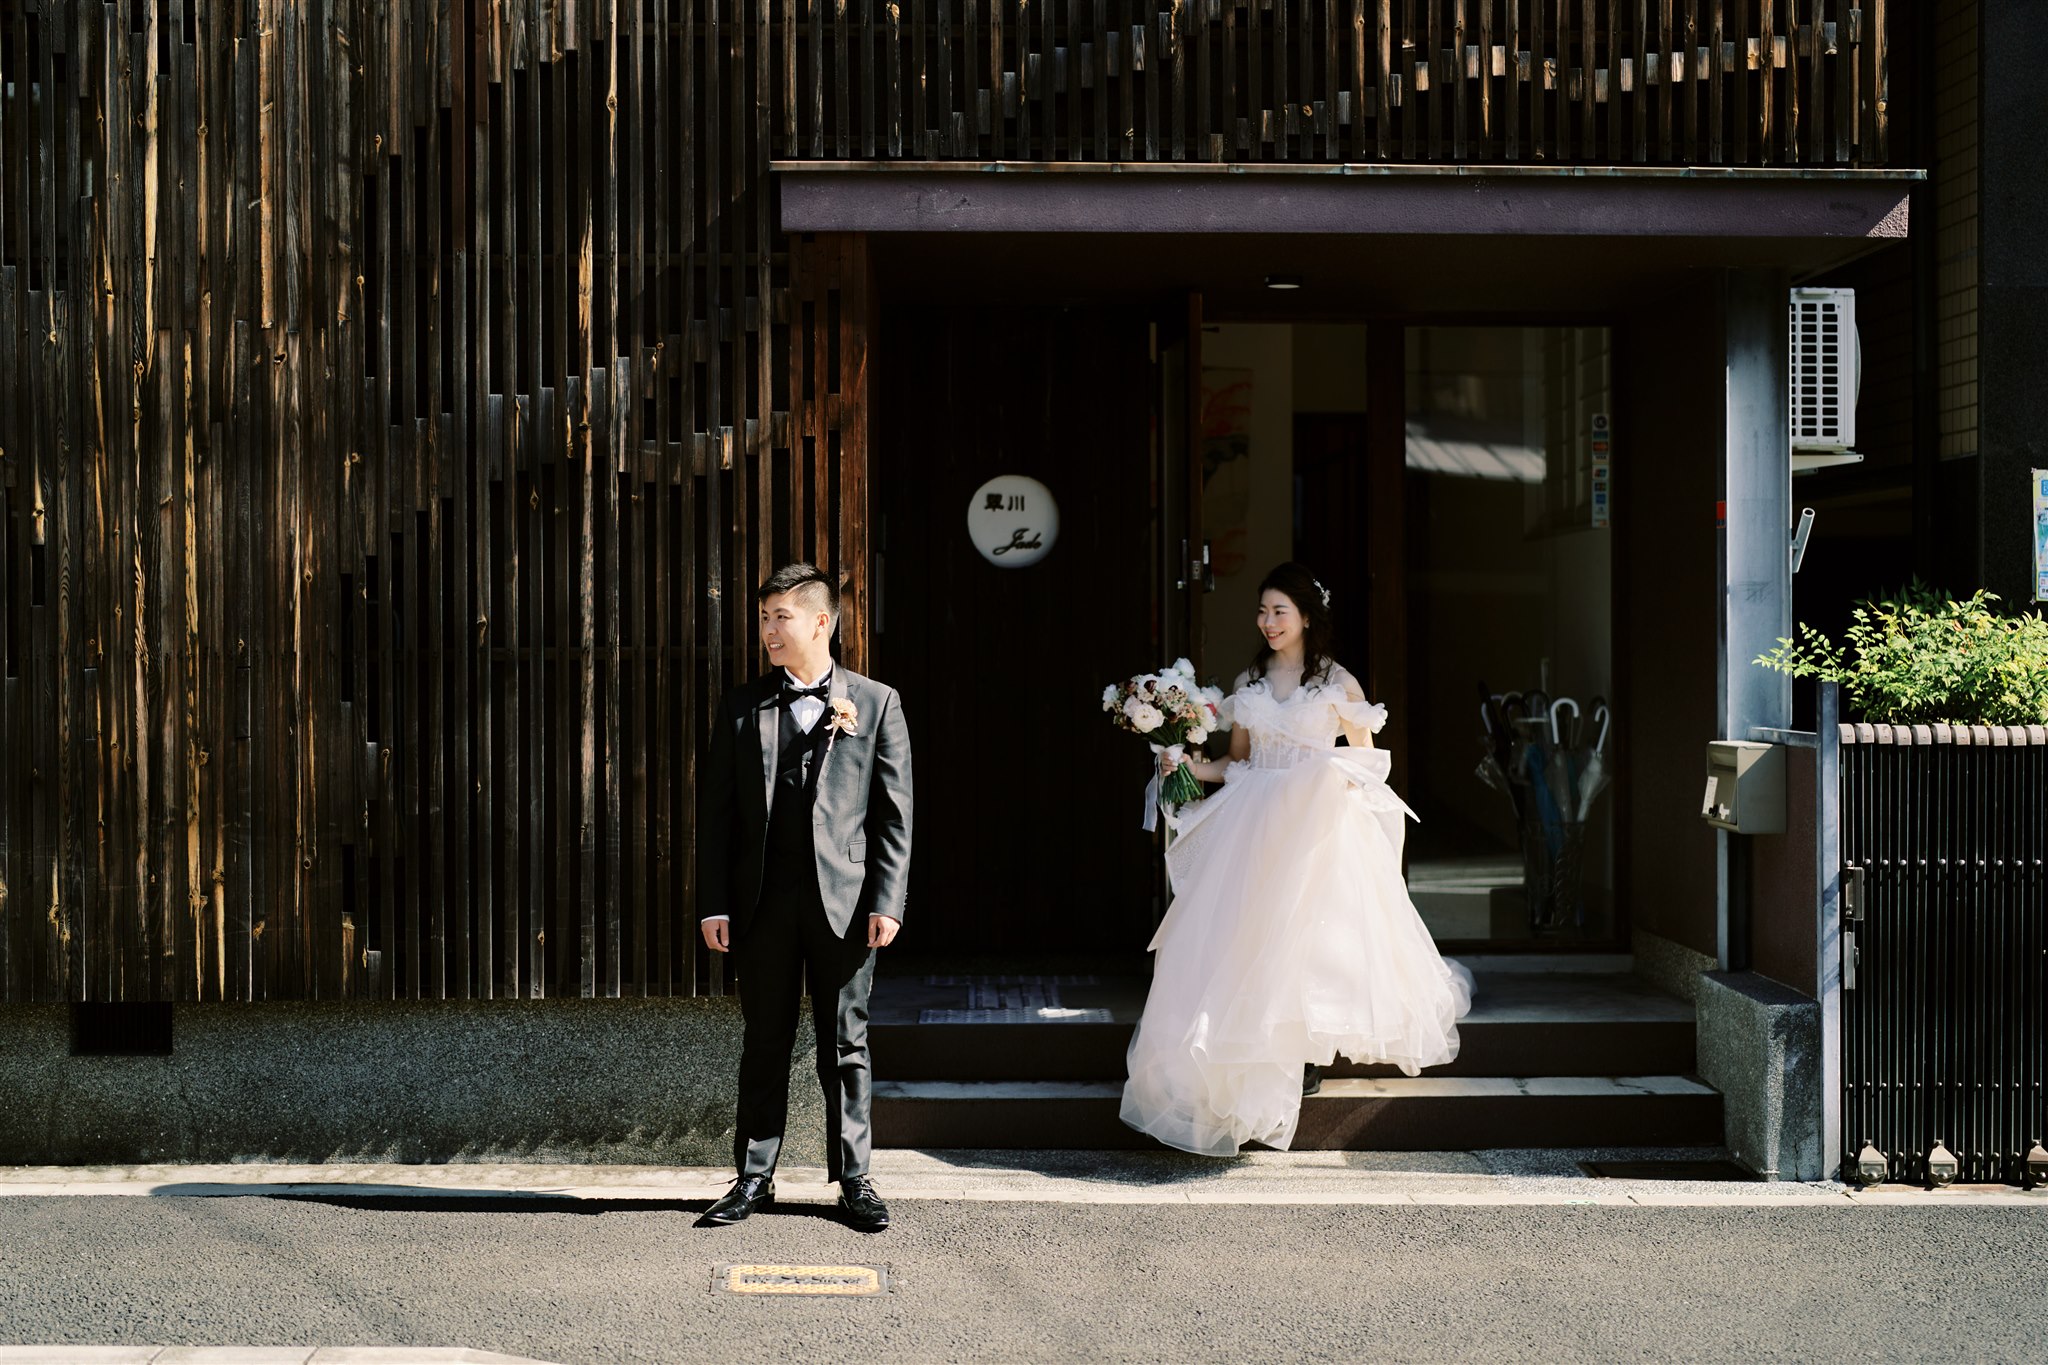 Kyoto Tokyo Japan Elopement Wedding Photographer, Planner & Videographer | A Japan elopement photographer captures a bride and groom standing in front of a building.